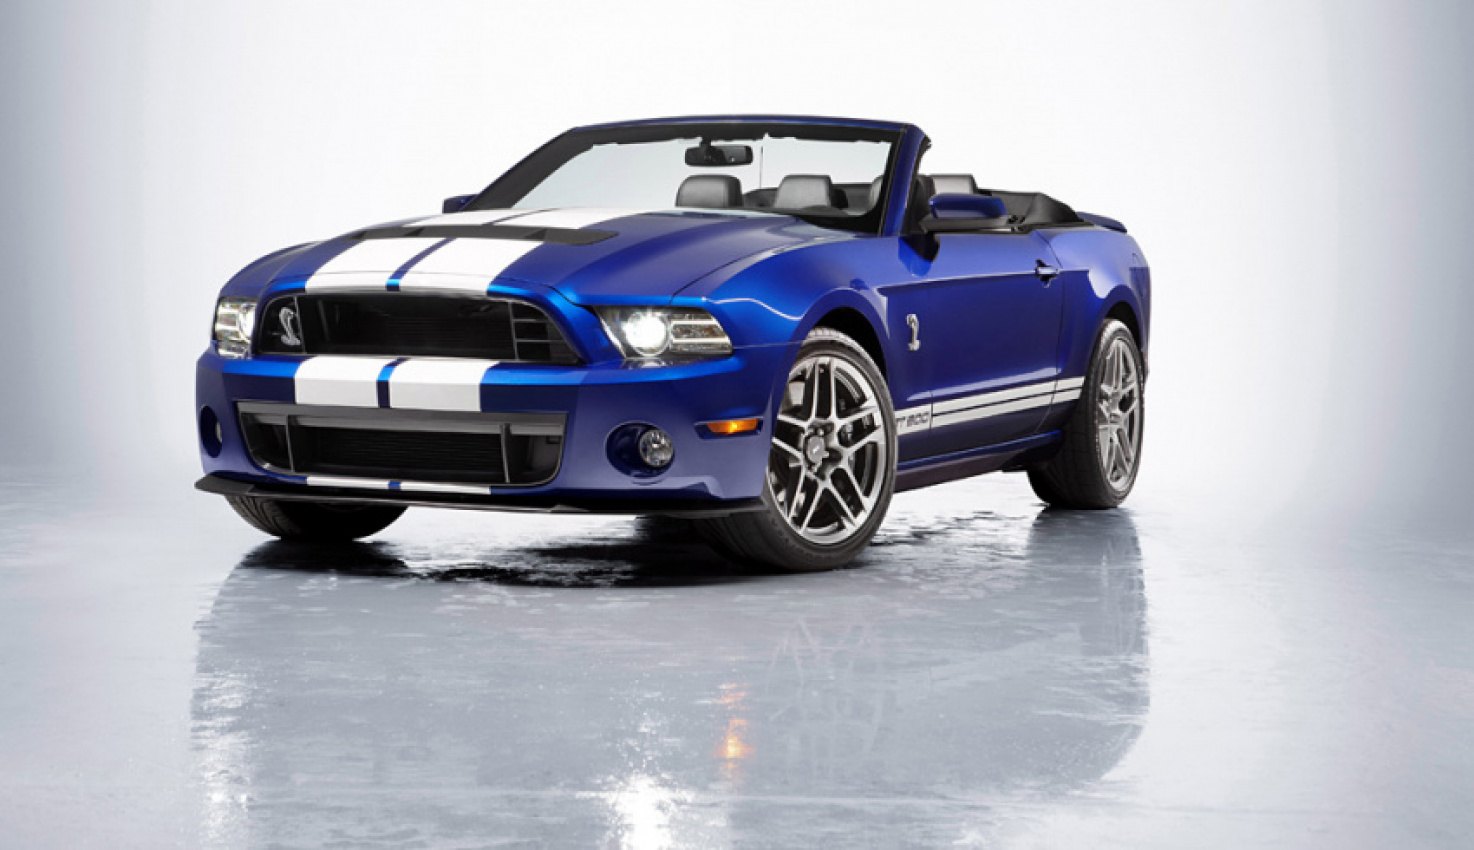 autos, cars, review, shelby, 2010s cars, 600-700hp, best of the best, classic, ford, ford mustang, muscle, muscle car, mustang, professionally tuned car, roadster, shelby cobra, shelby model in depth, top speed 200mph+, tuned mustang, 2013 shelby gt500 convertible